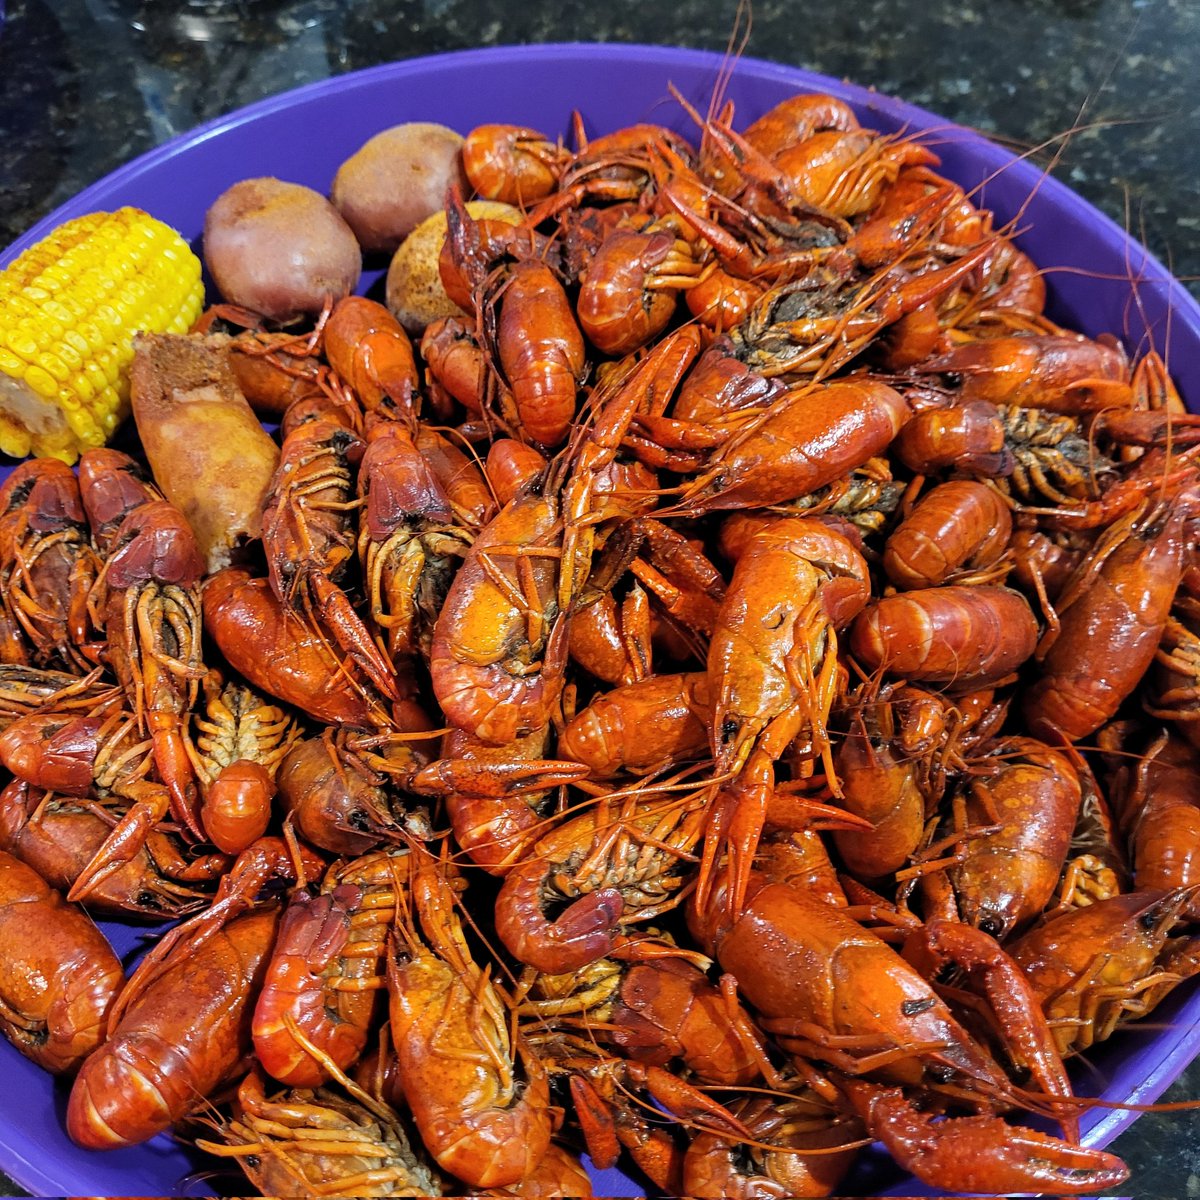 It's what's for dinner in SE Louisiana!! #cajunlife